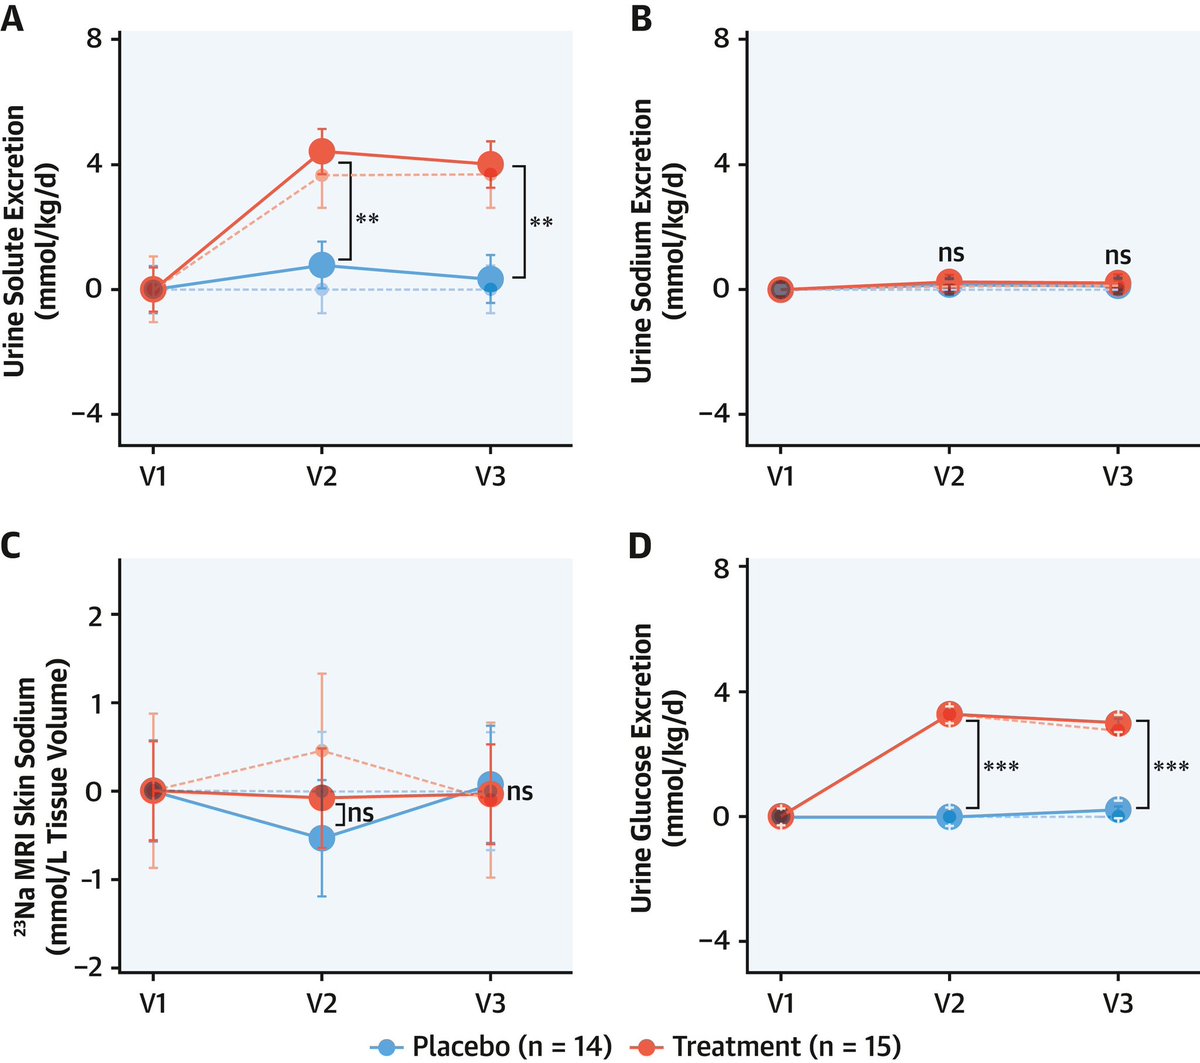 #DAPA-Shuttle1 @dukenus : Hepato-renal Regulation of Water Conservation in #HeartFailure Patients With #SGLT2i

📌N=33 , Male 
📌Avg age ~ 59 yr
📌LVEF ~ 31%

#Dapagliflozin ;

📍Boosts urine #glucose excretion in HF patients (early: 3.3 mmol/kg/d, late: 2.7 mmol/kg/d, P<0.0001)